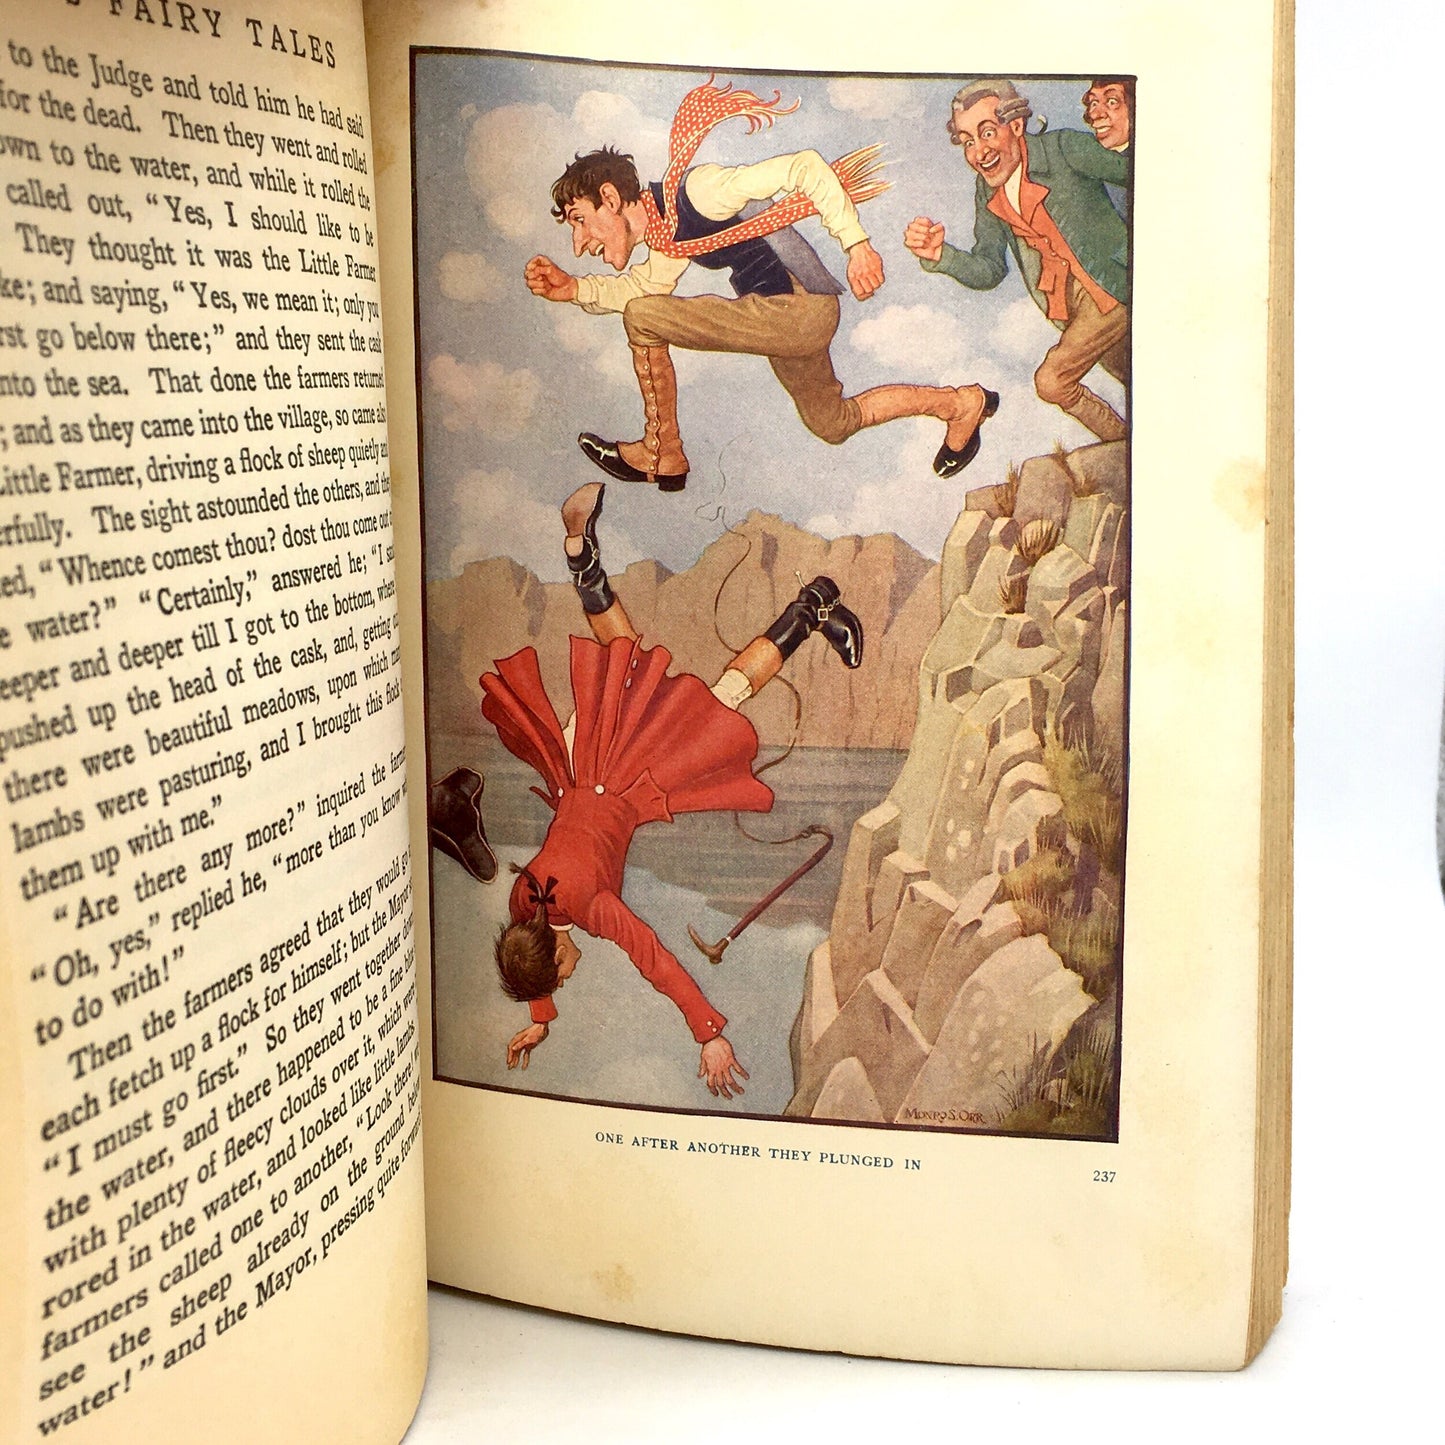 GRIMM, Brothers “Grimm’s Fairy Tales” [David McKay, c1930s] - Buzz Bookstore